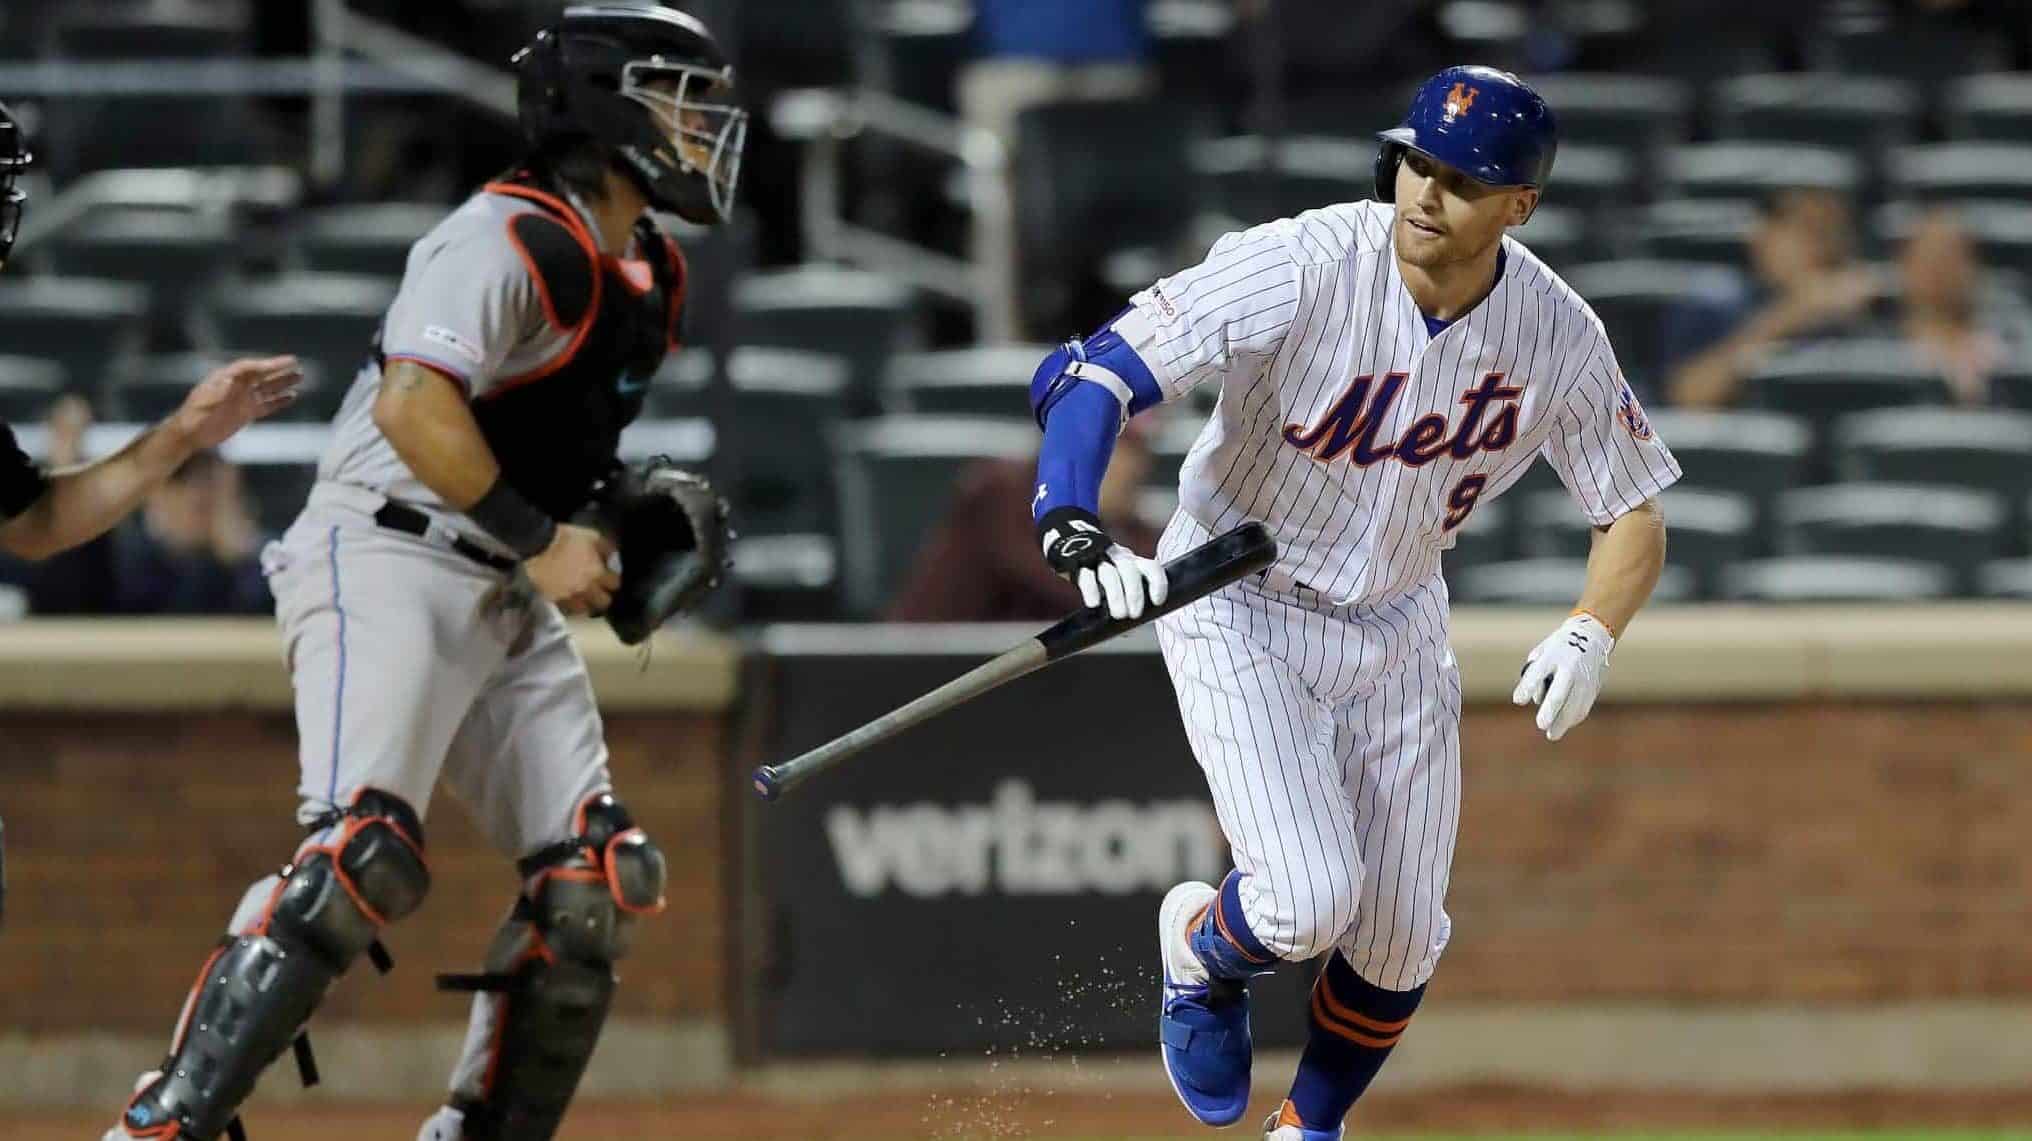 NEW YORK, NEW YORK - SEPTEMBER 24: Brandon Nimmo #9 of the New York Mets heads to first after he is walked with the bases loaded to score the game winning run in the 11th inning as catcher Jorge Alfaro #38 of the Miami Marlins reacts at Citi Field on September 24, 2019 in the Flushing neighborhood of the Queens borough of New York City.The New York Mets defeated the Miami Marlins 5-4 in 11 innings.